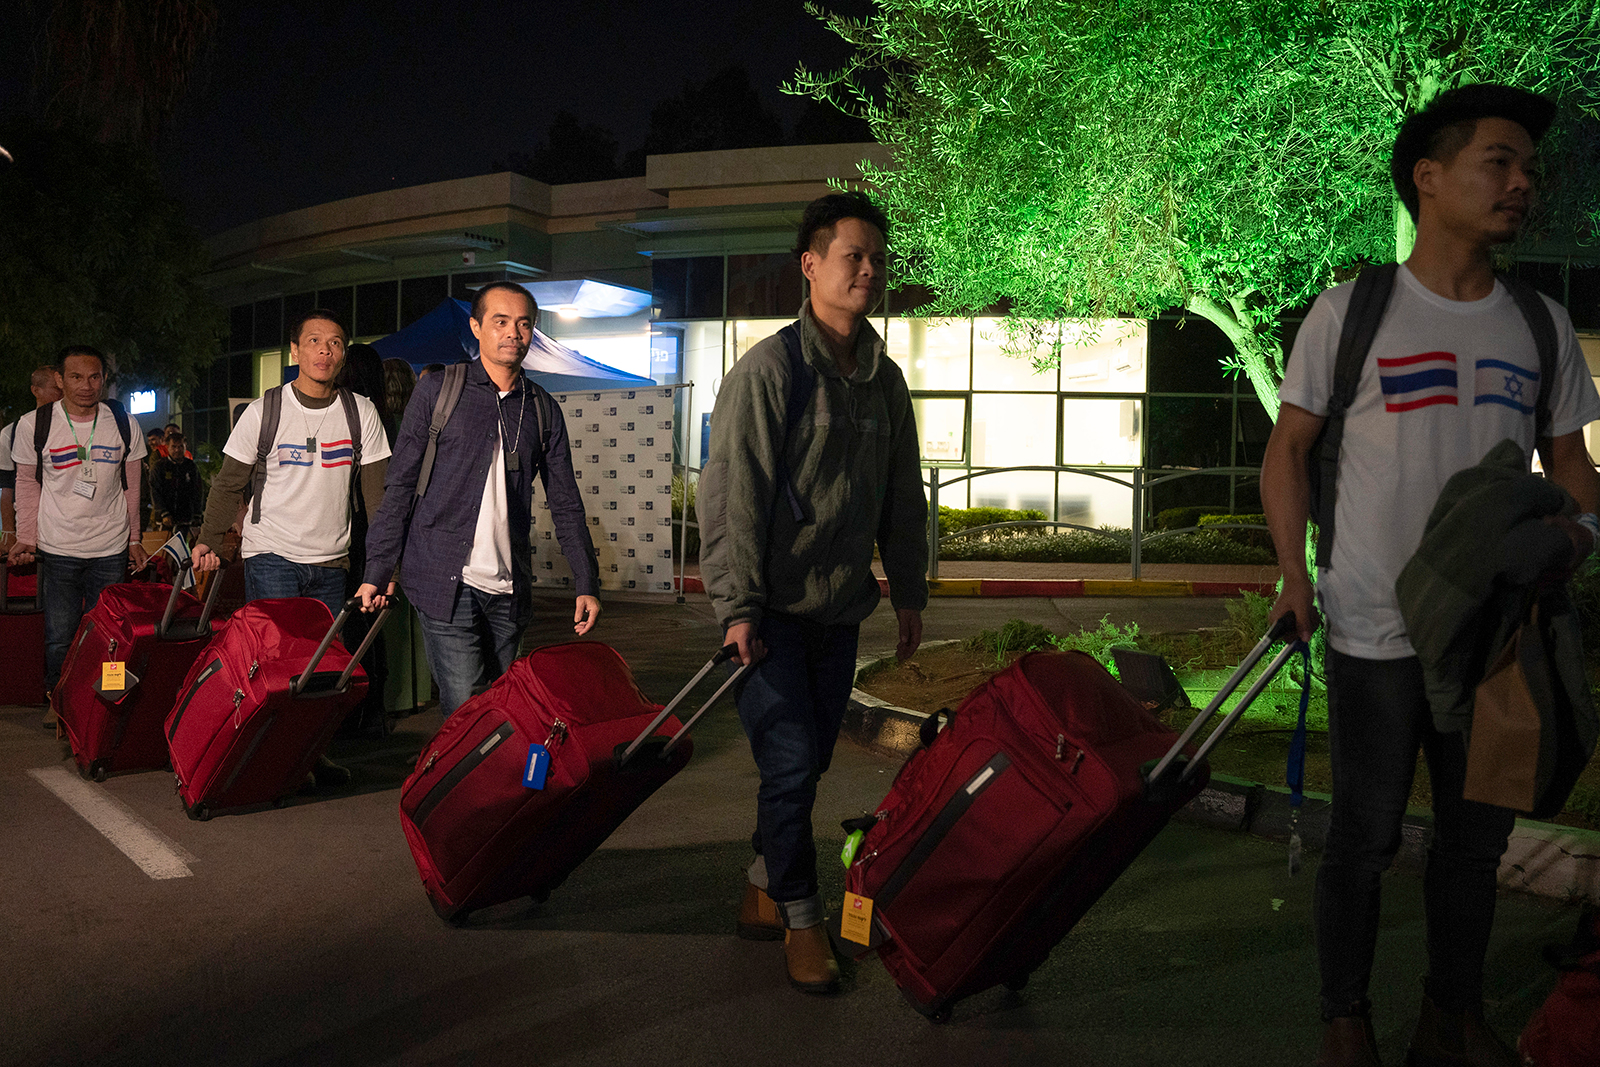 Thai nationals walk to a bus as they leave the Shamir Hospital in Ramle, Israel, on Wednesday, November 29, on their way back to Thailand.